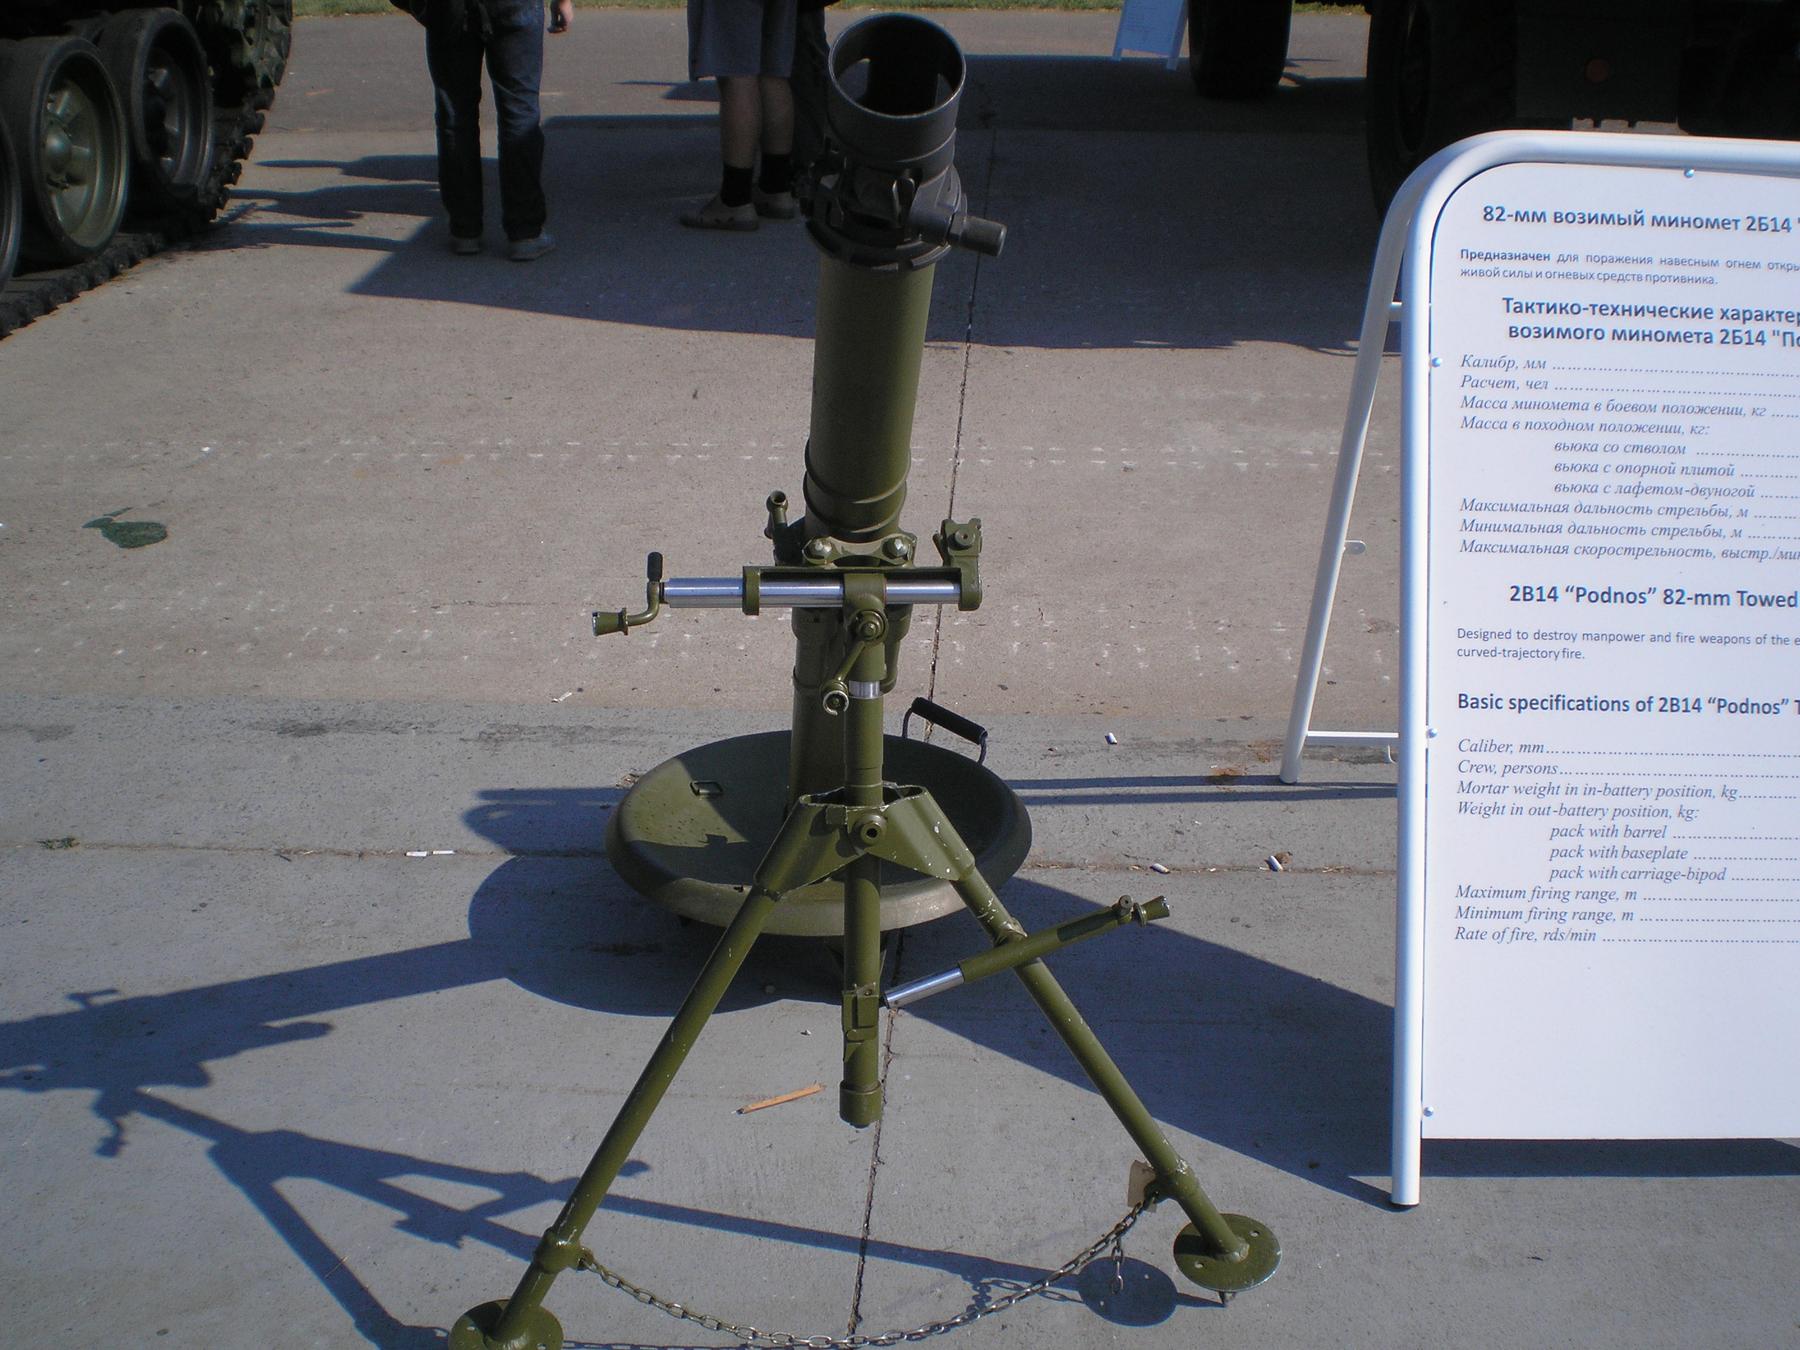 File:2B14 Podnos at 'Engineering Technologies 2010' forum.jpg - Image of Technology, An image showin